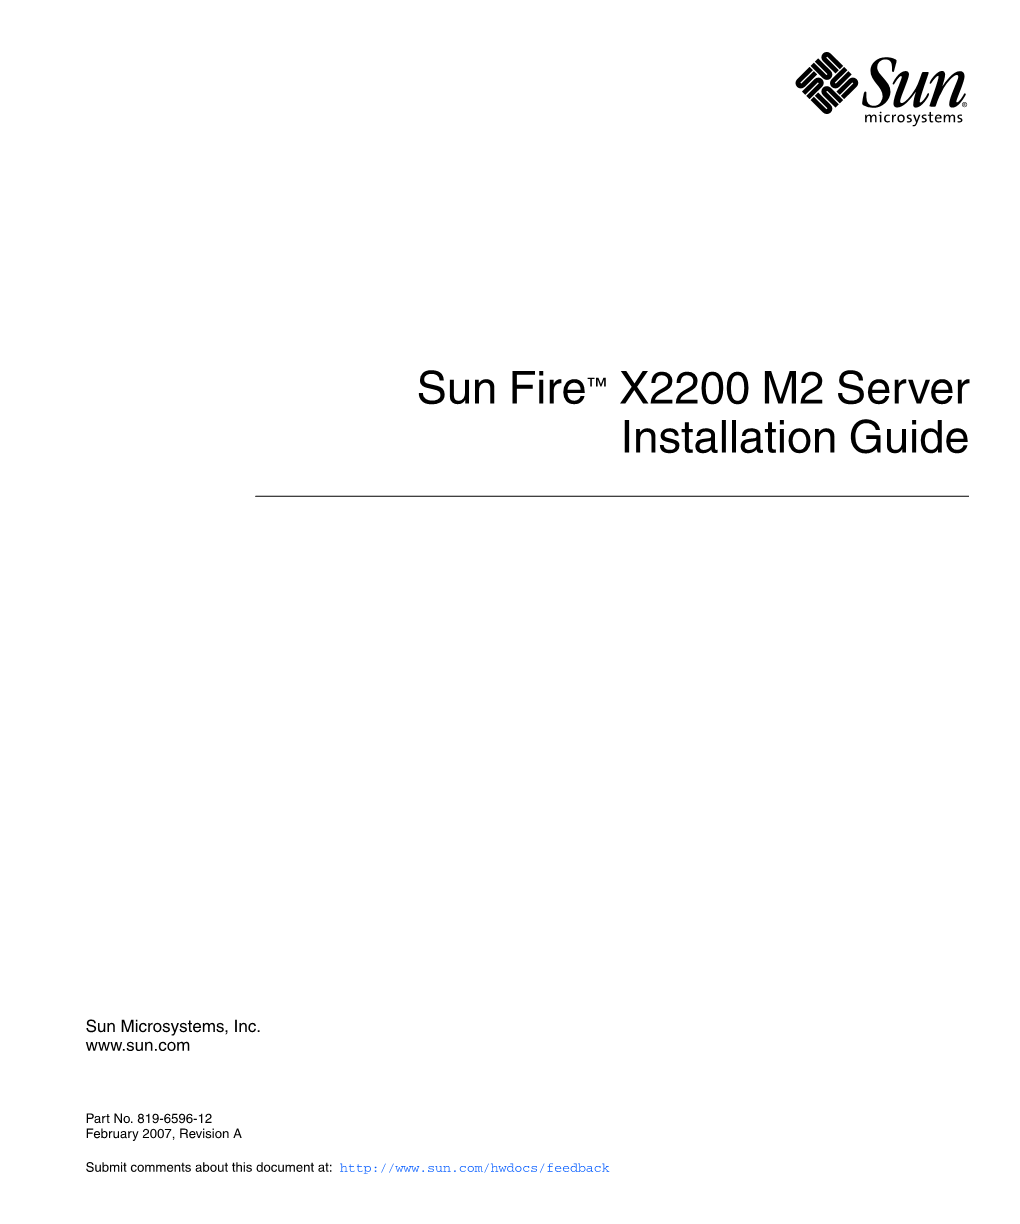 Sun Fire X2200 M2 Server Installation Guide • February 2007 CHAPTER 1